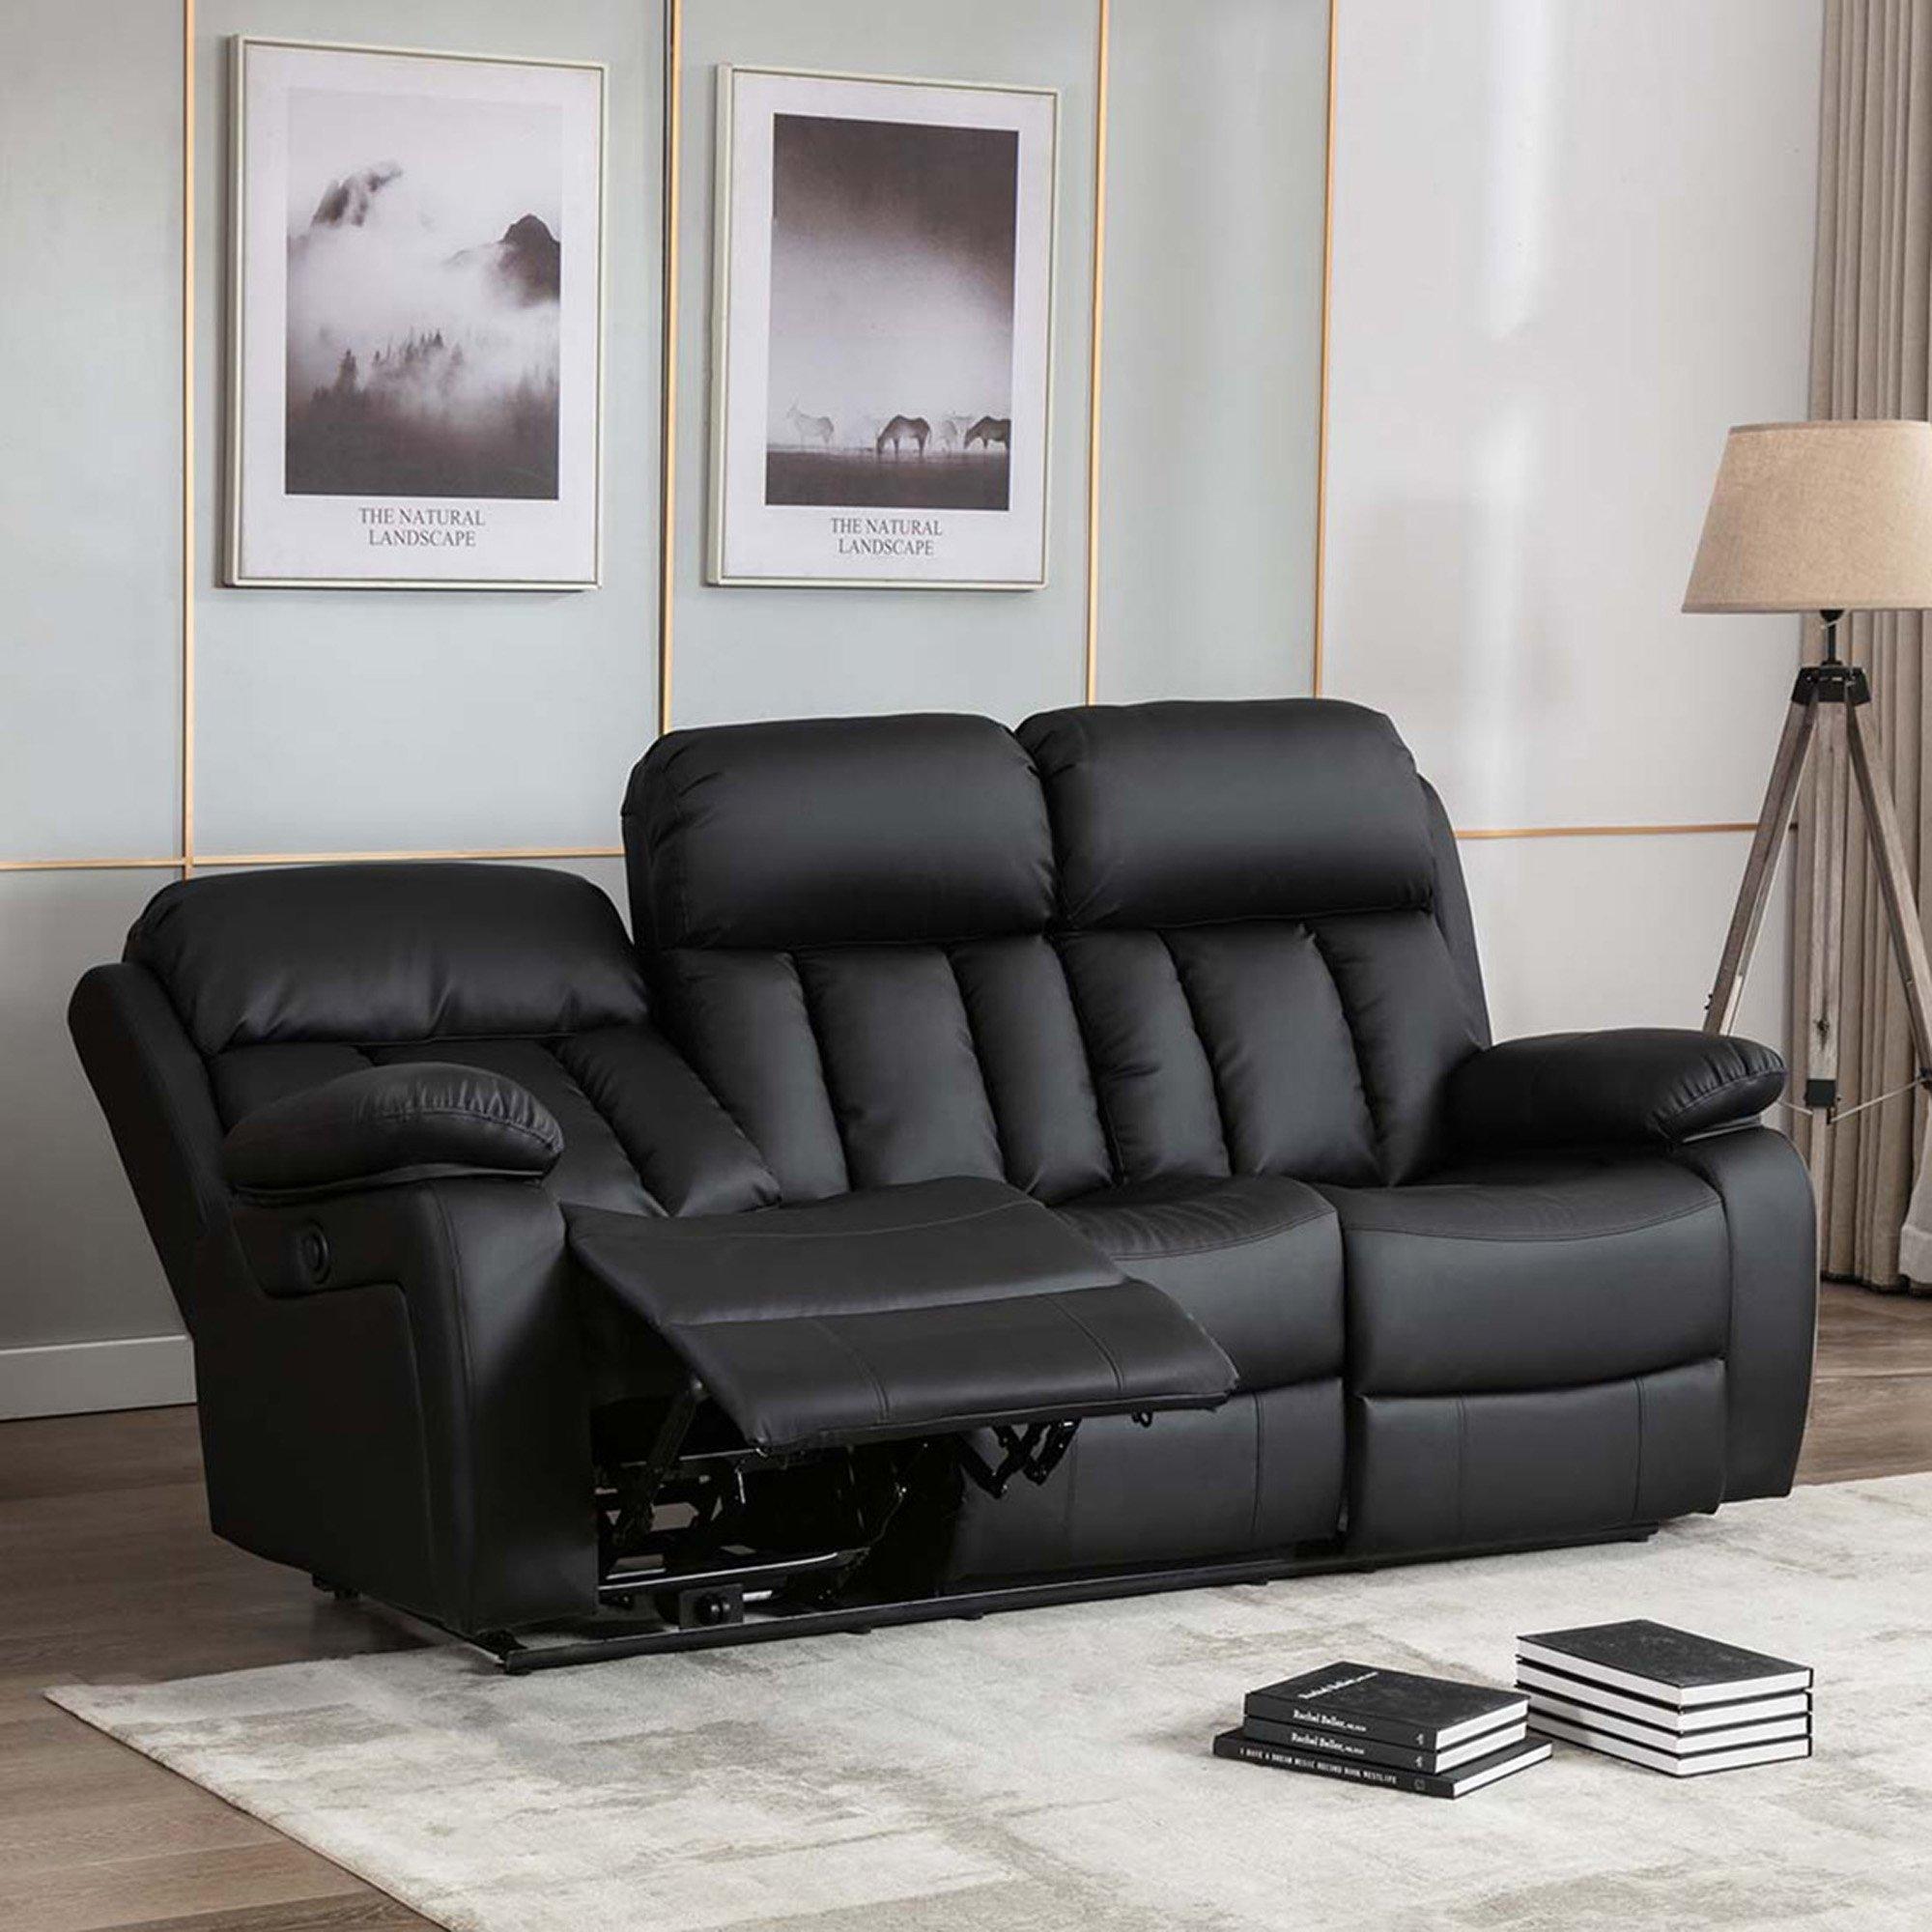 Chester 3 Seater Electric High Back Bonded Leather Recliner Sofa